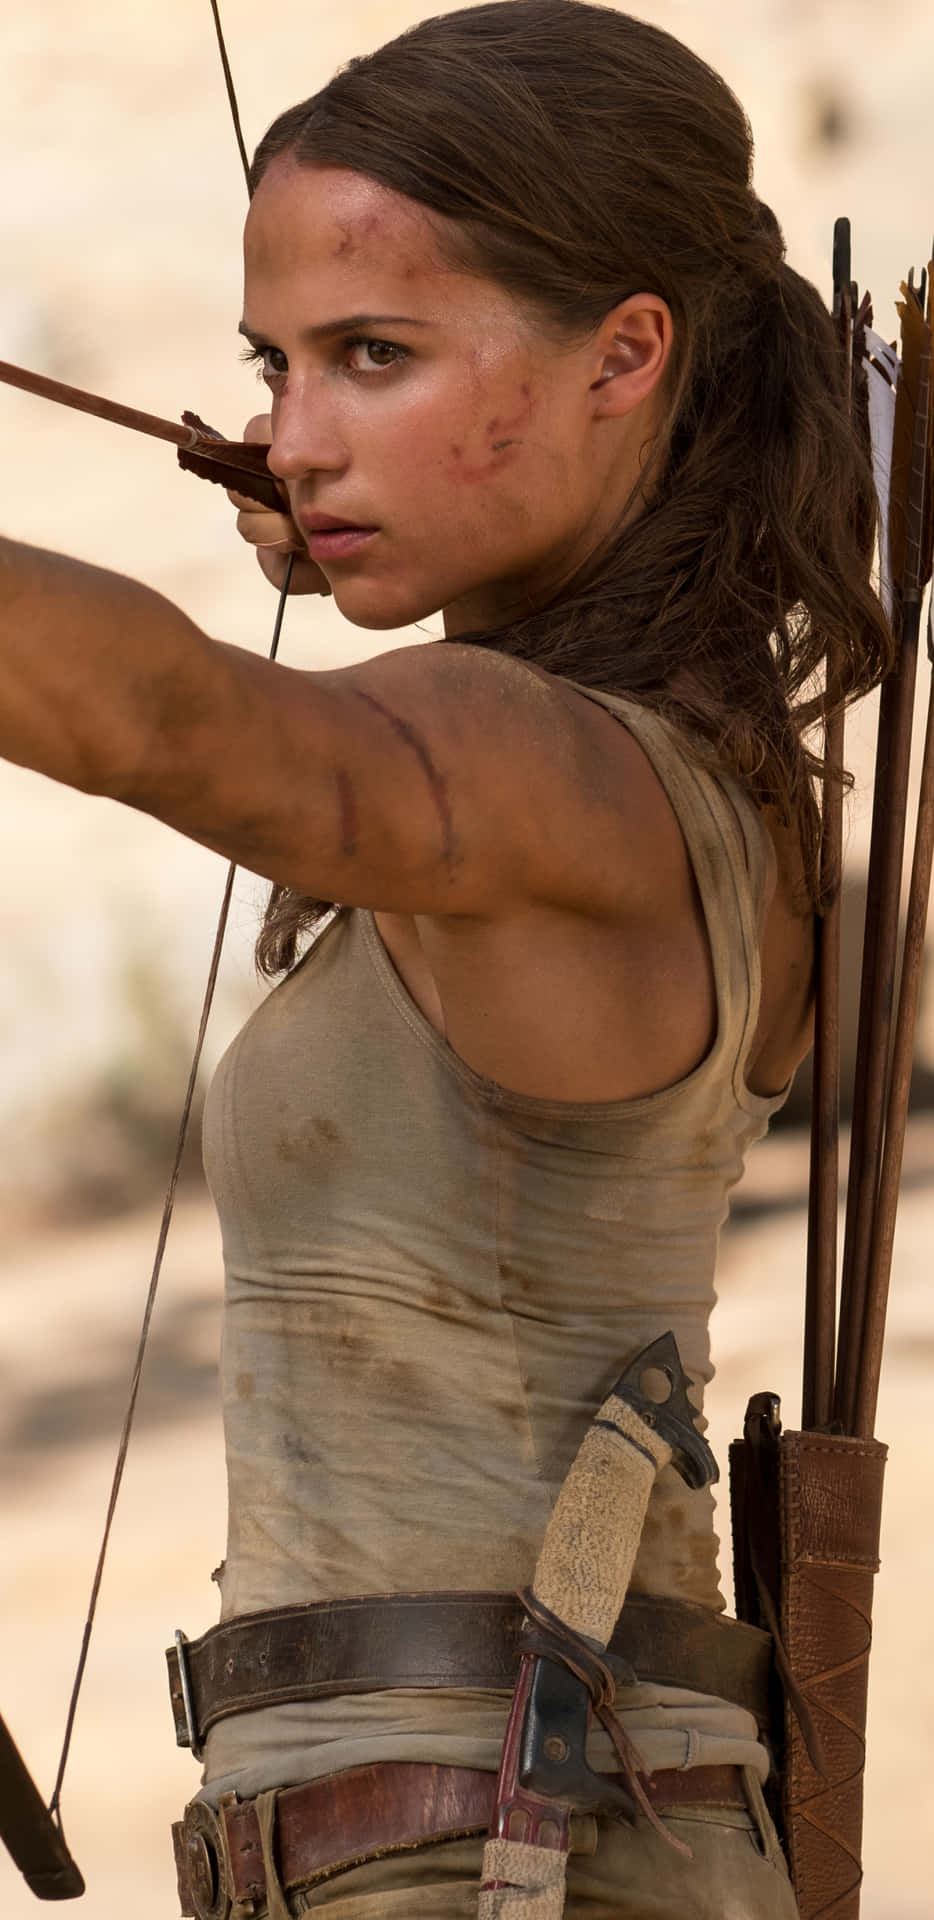 Get Ready For Your Next Adventure With The Tomb Raider Phone Wallpaper